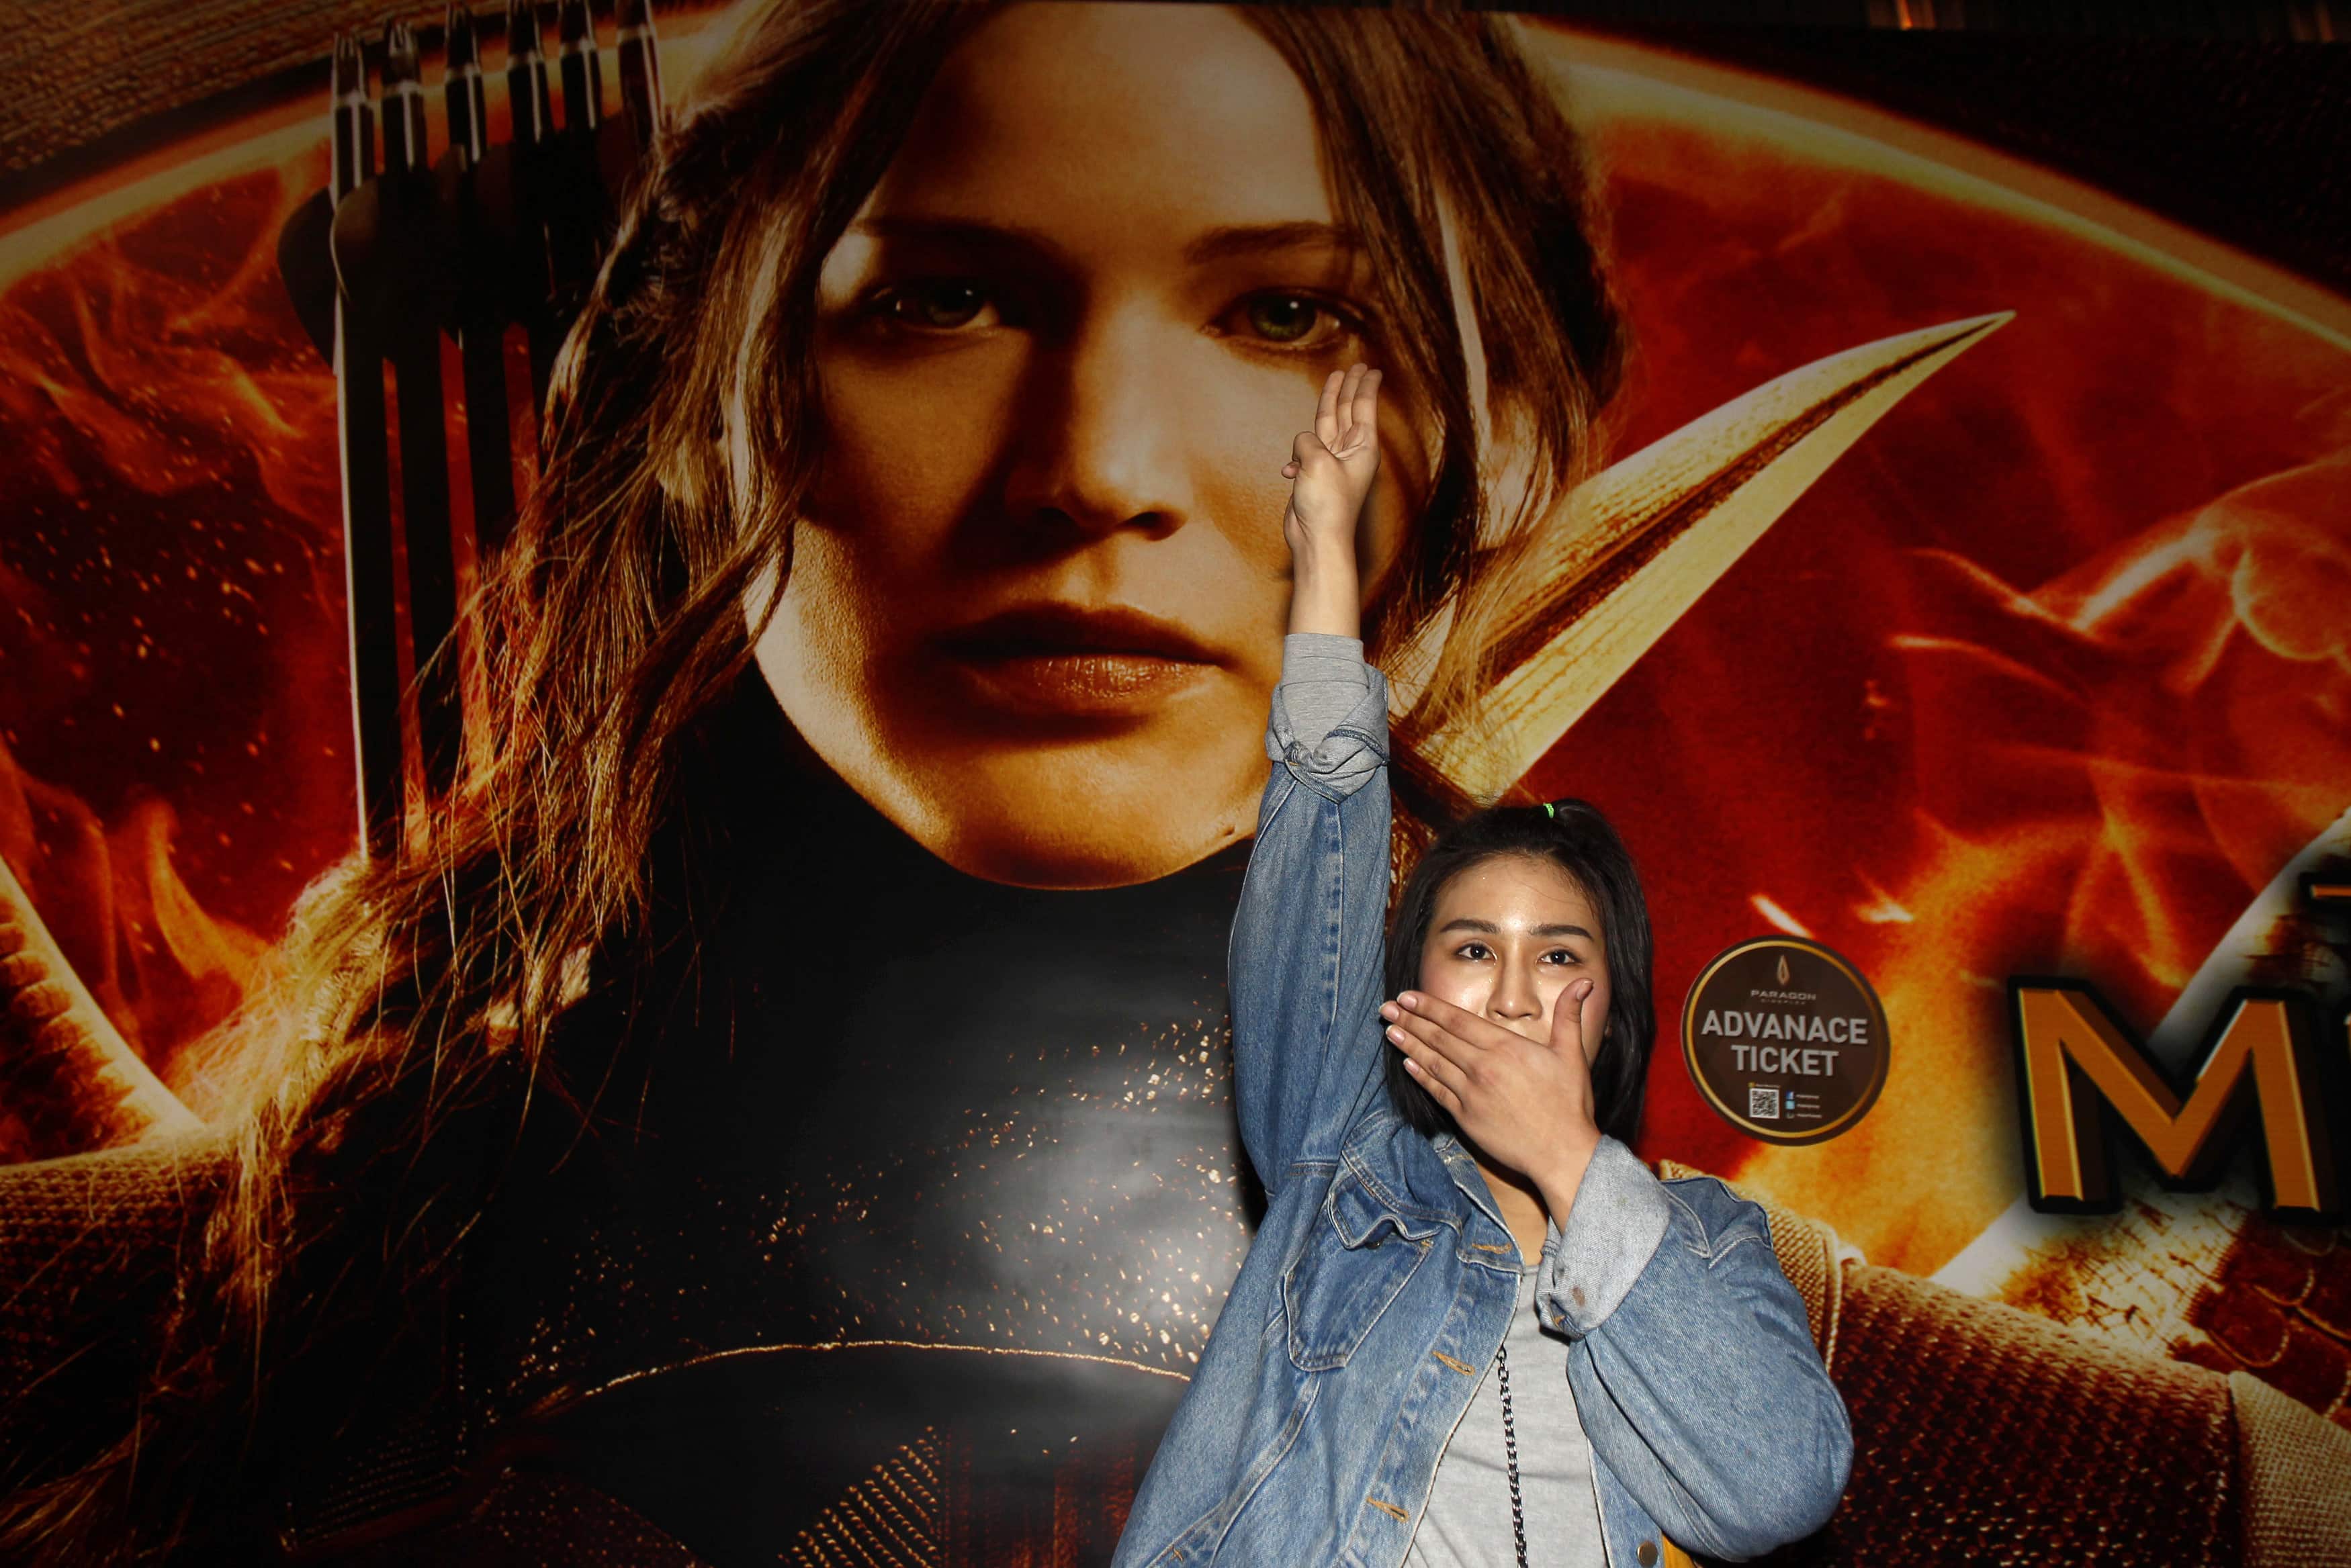 A student flashes a three-finger salute inspired by the movie "The Hunger Games" outside the Siam Paragon cinema in Bangkok, 20 November 2014, REUTERS/Chaiwat Subprasom